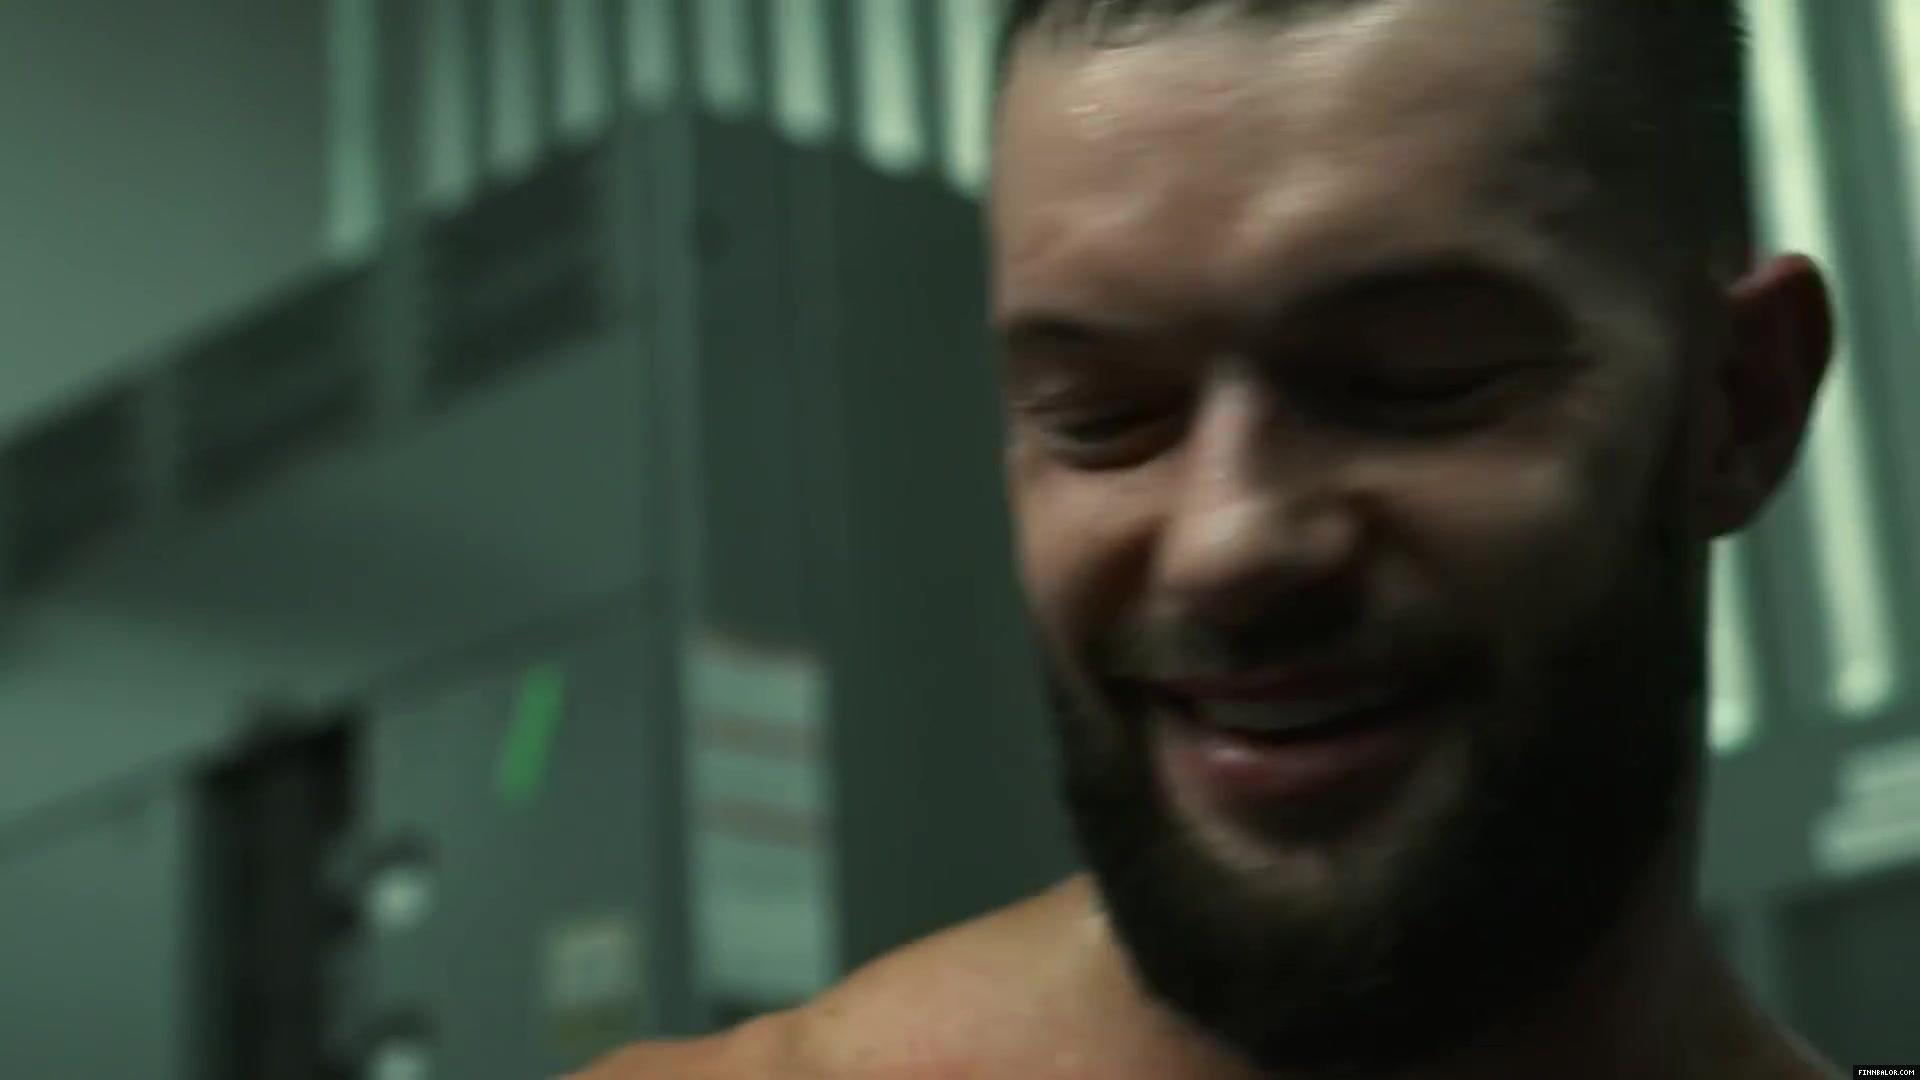 Finn_Balor___The_Rising_of_the_Prince_in_NXT_609.jpg